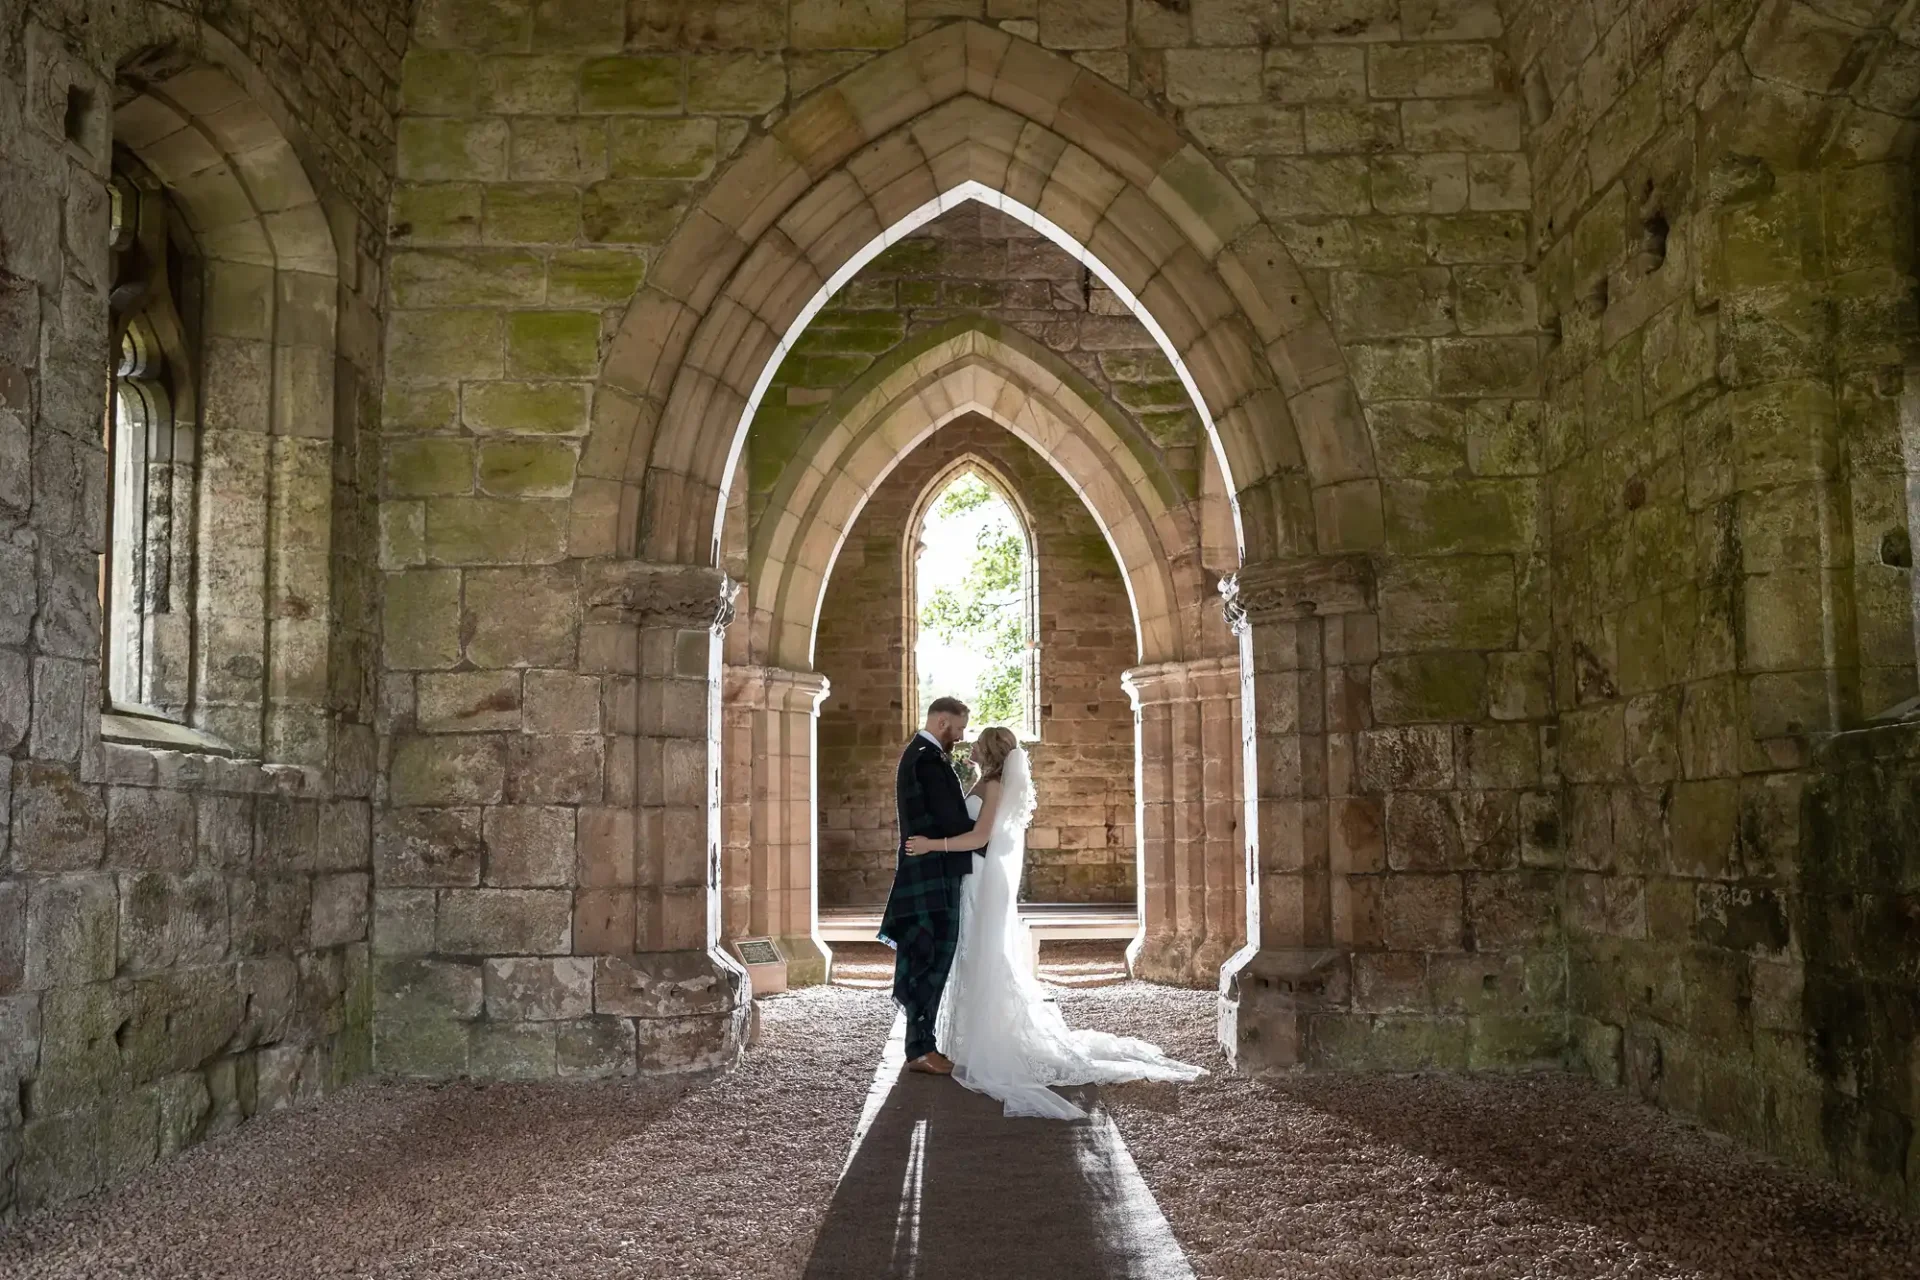 A bride and groom embrace under the arched doorways of an ancient stone building, with natural light illuminating them from behind.